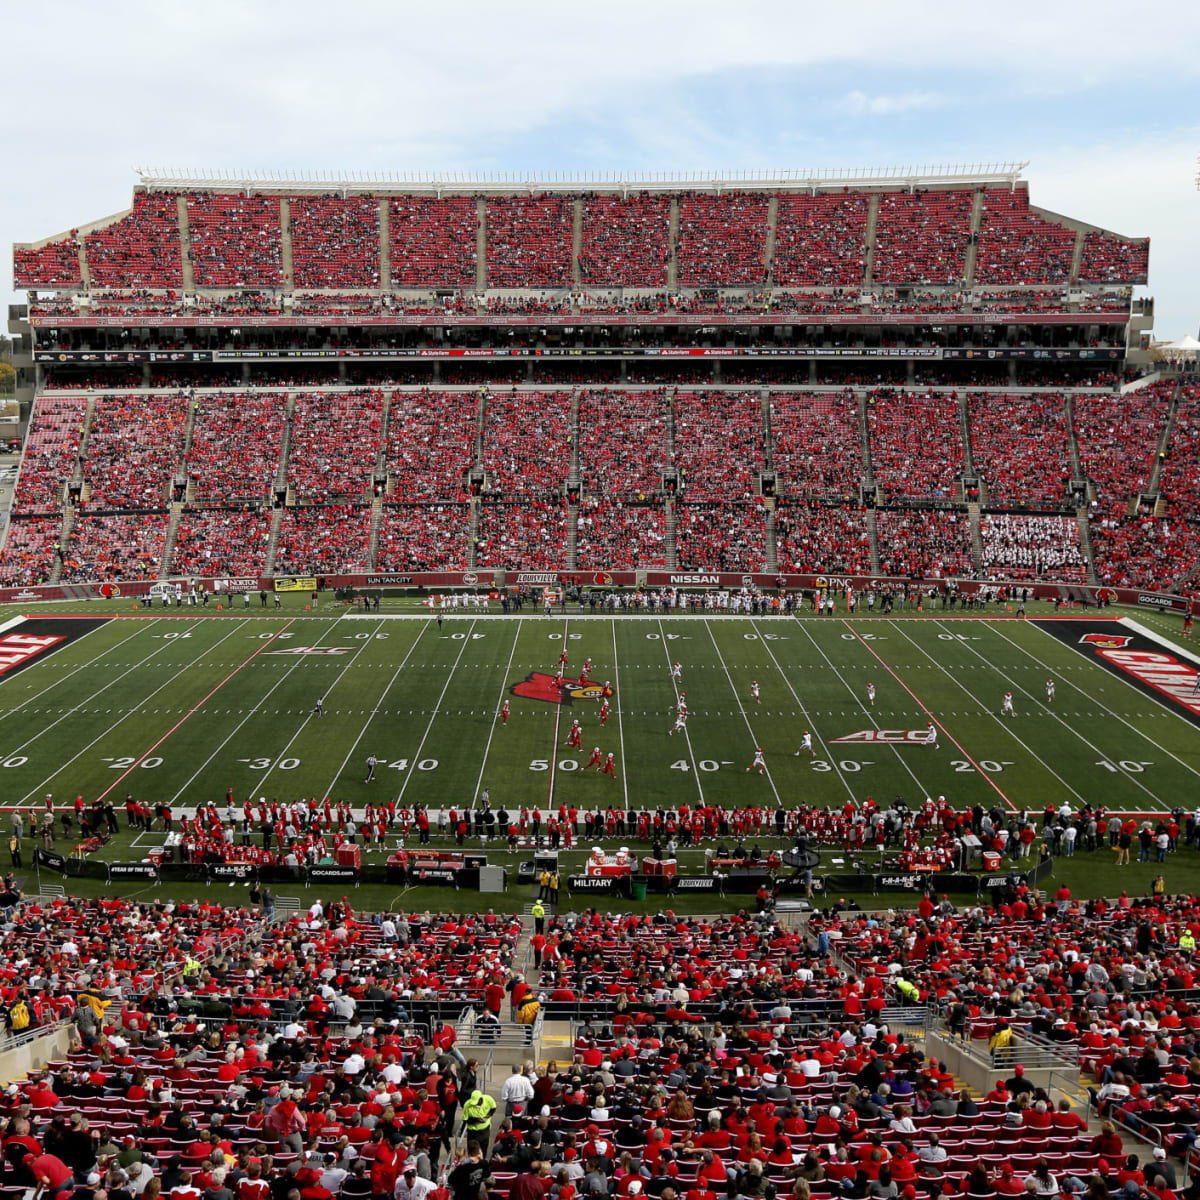 Changes coming for U of L football fans attending games at Cardinal Stadium, News